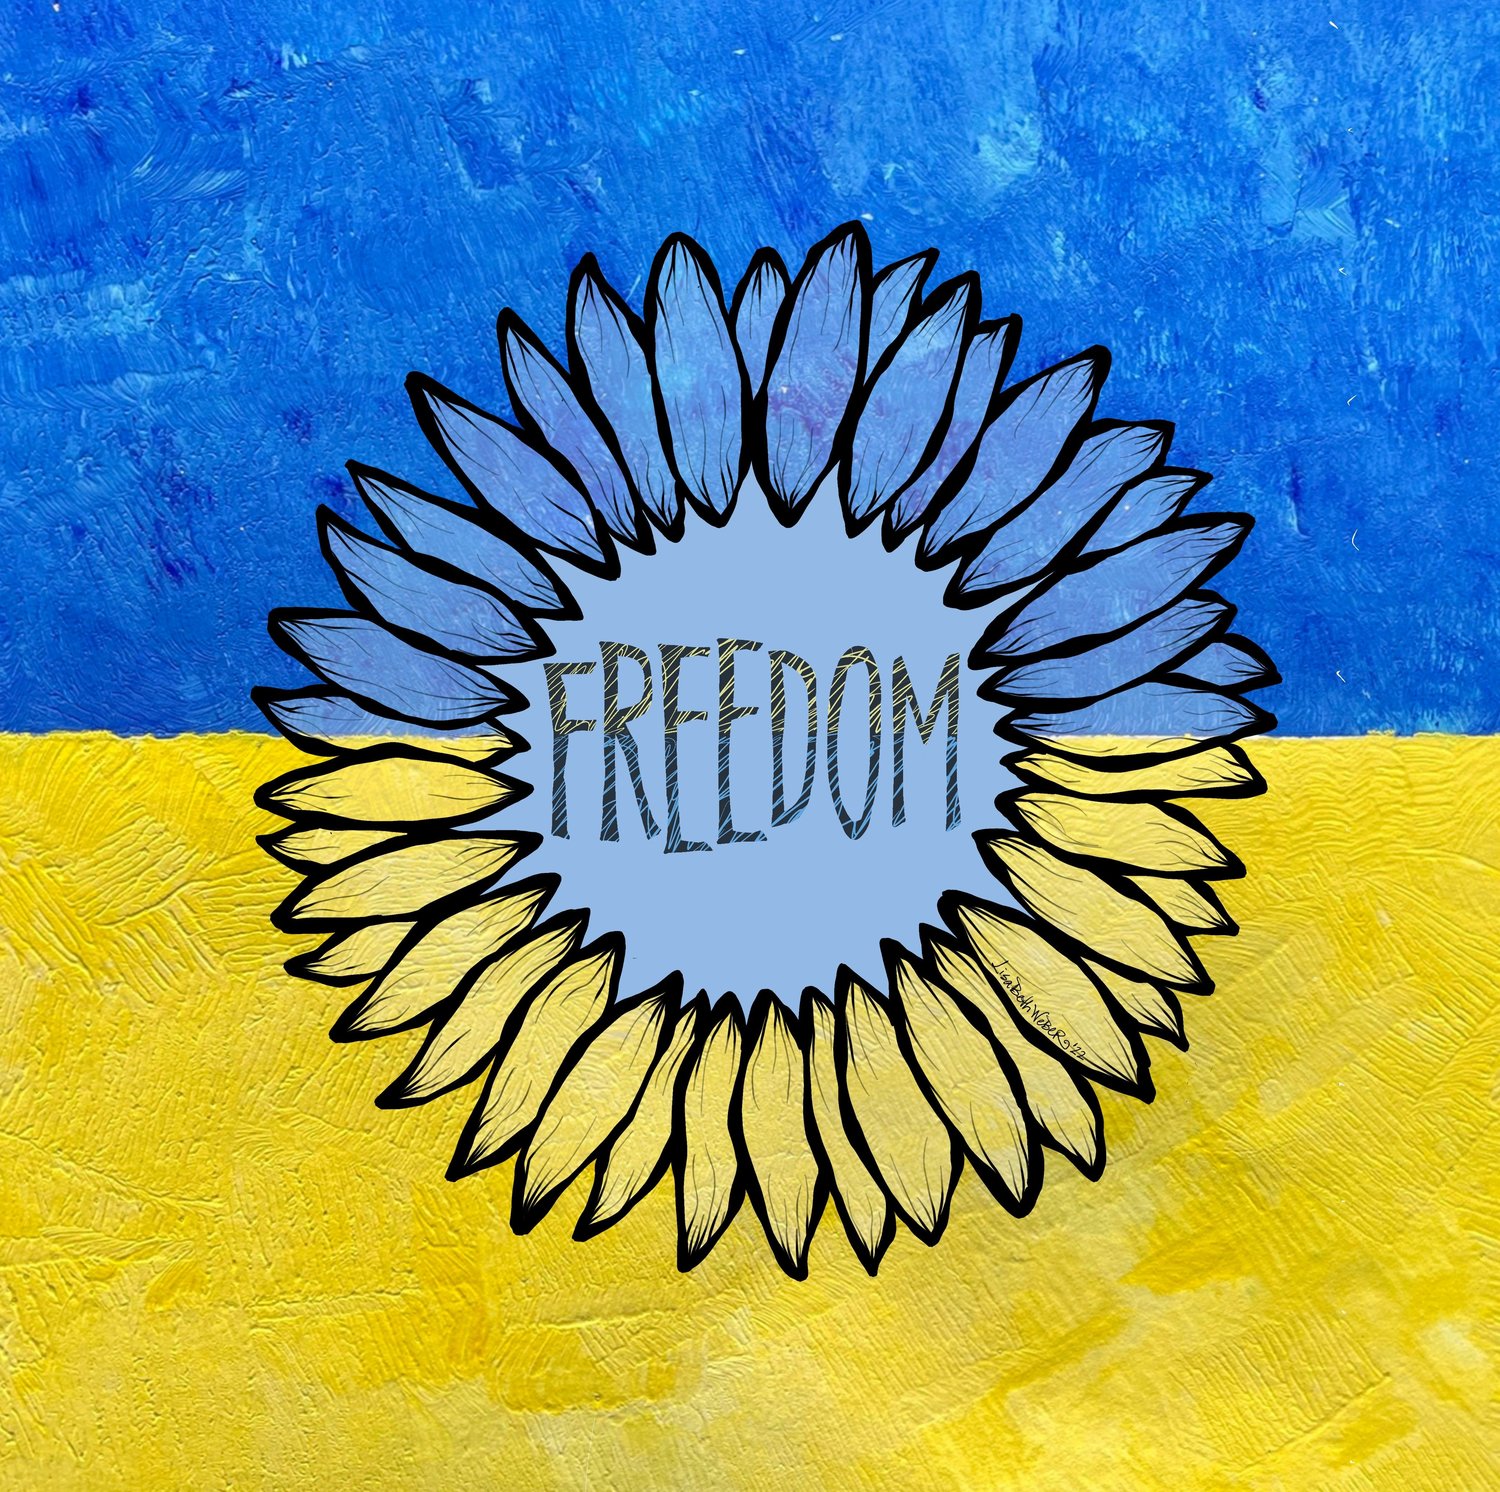 This artwork was created by LisaBeth Weber to raise funds to help Ukraine.